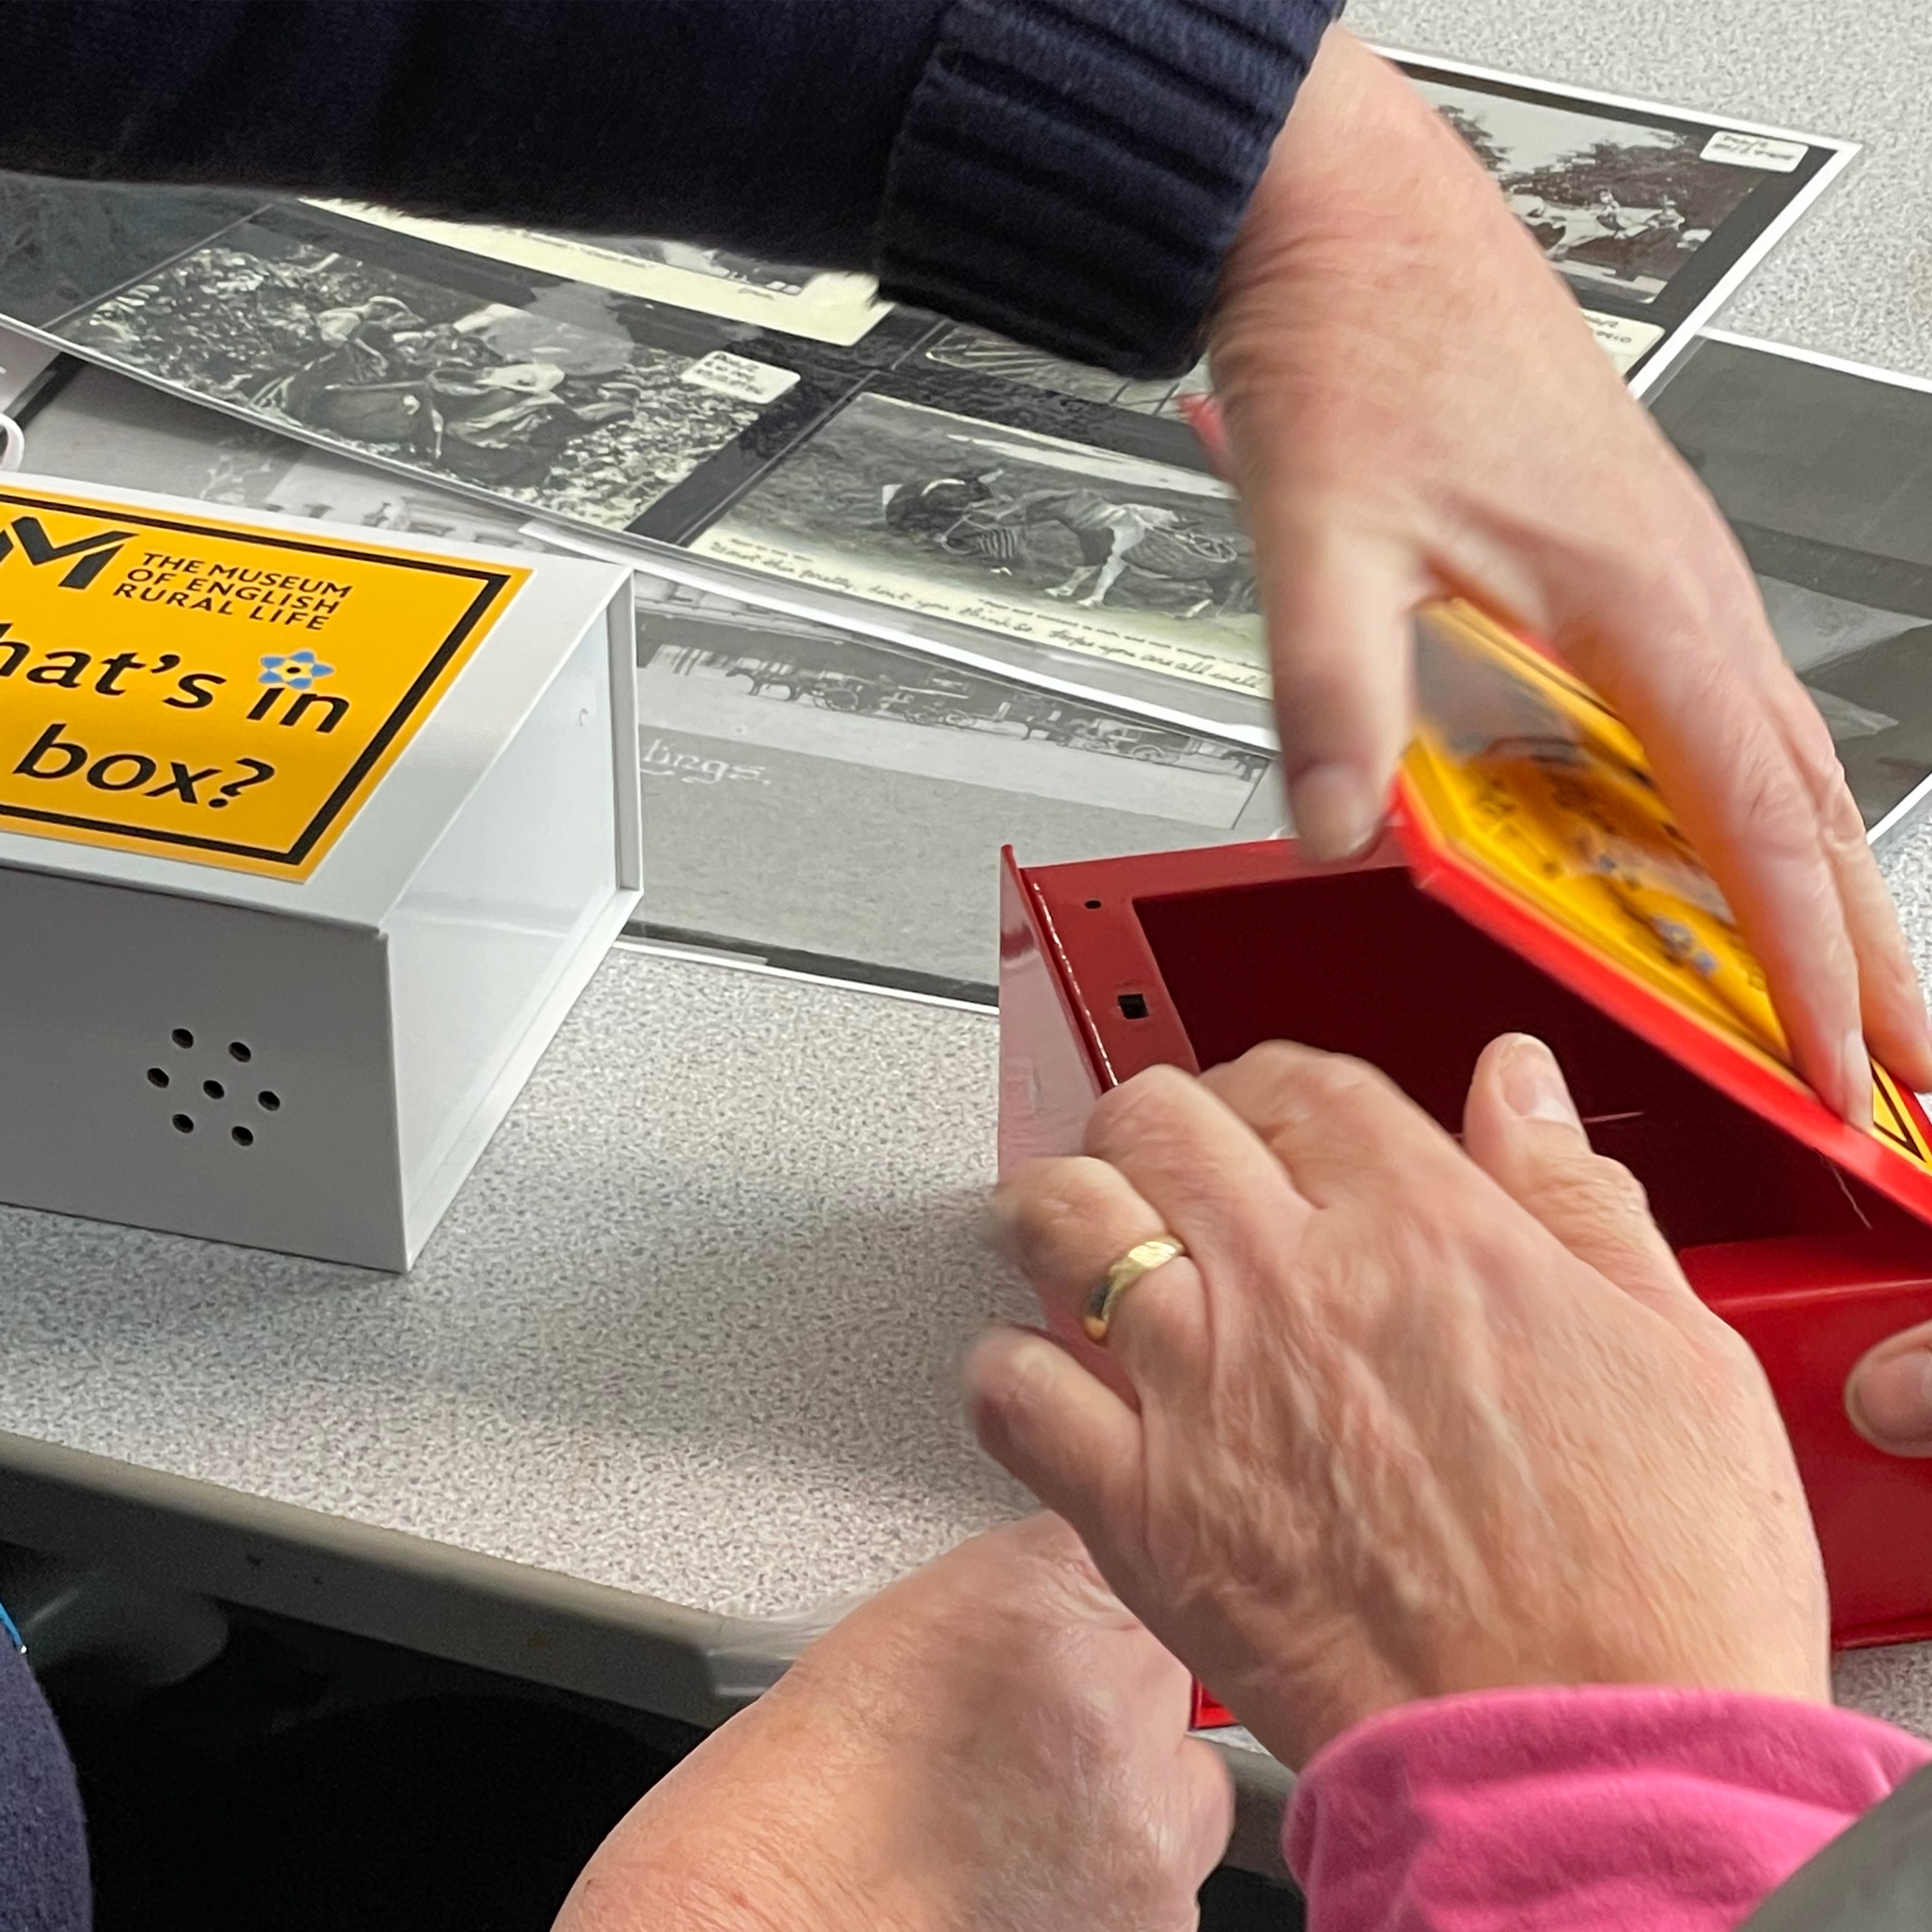 Members of the public opening a compartment of an AMuSED Box.